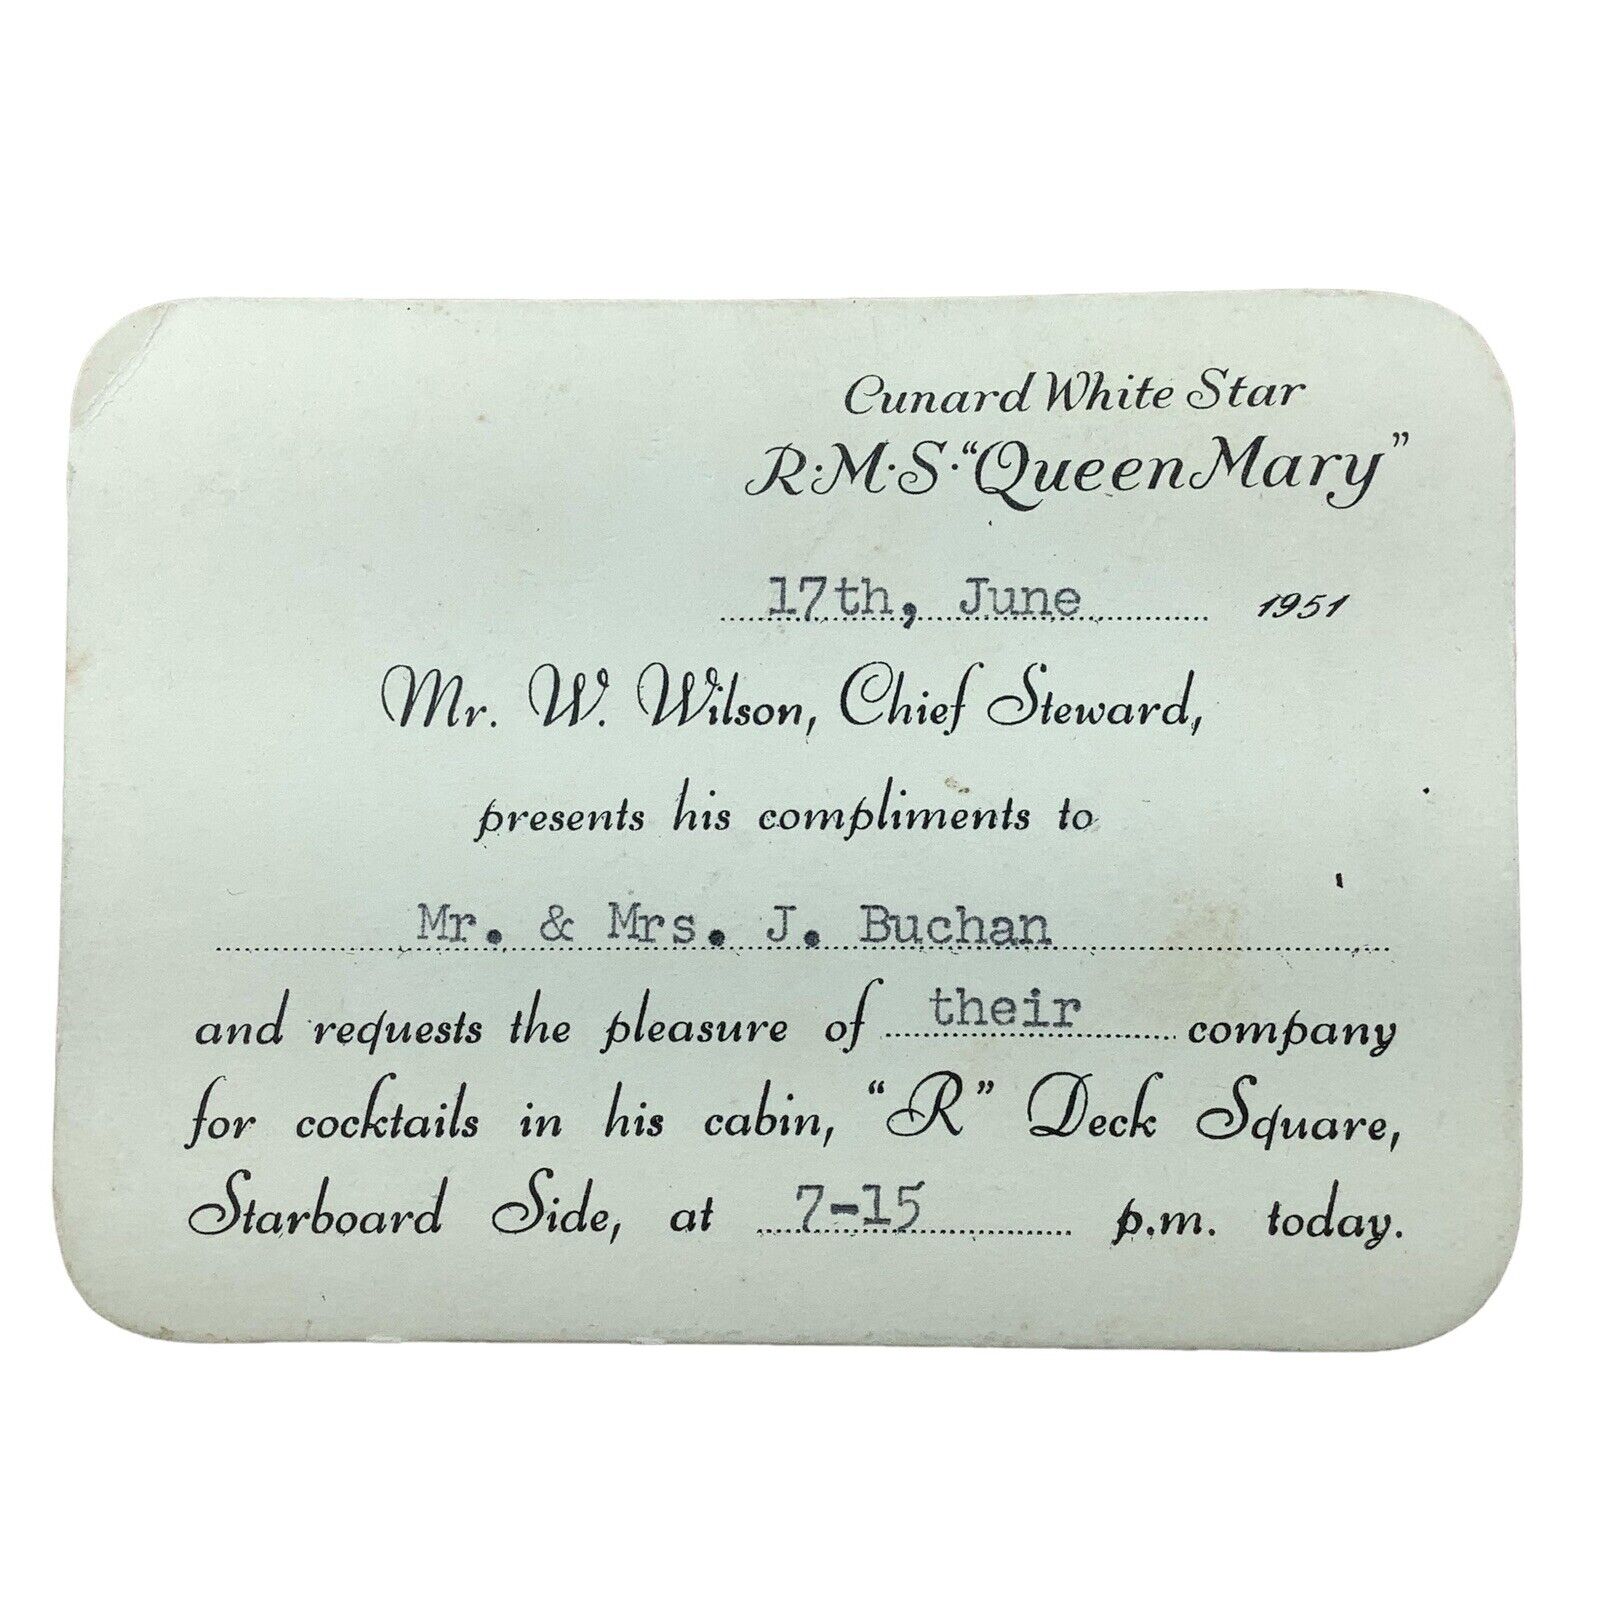 R. M. S “Queen Mary” Cocktail Invitation June 1951 Cunard White Star Cruise Line